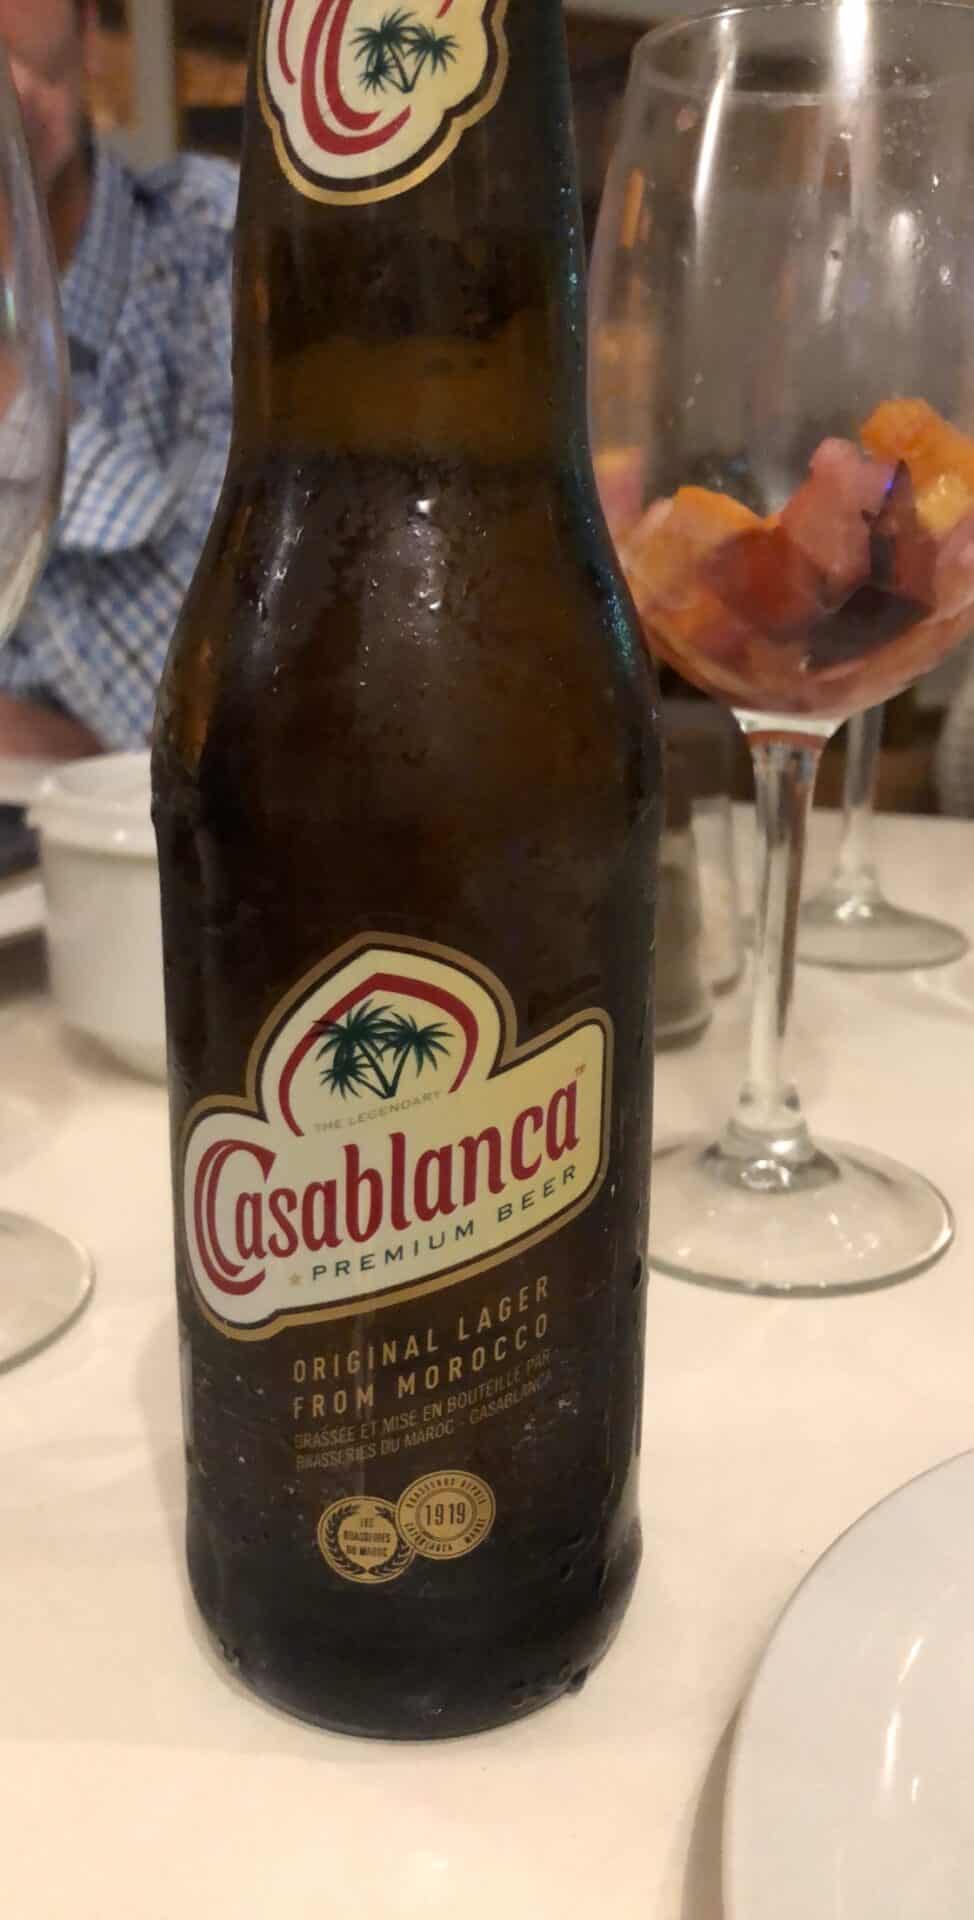 Casablanca brand beer on a table in Morocco